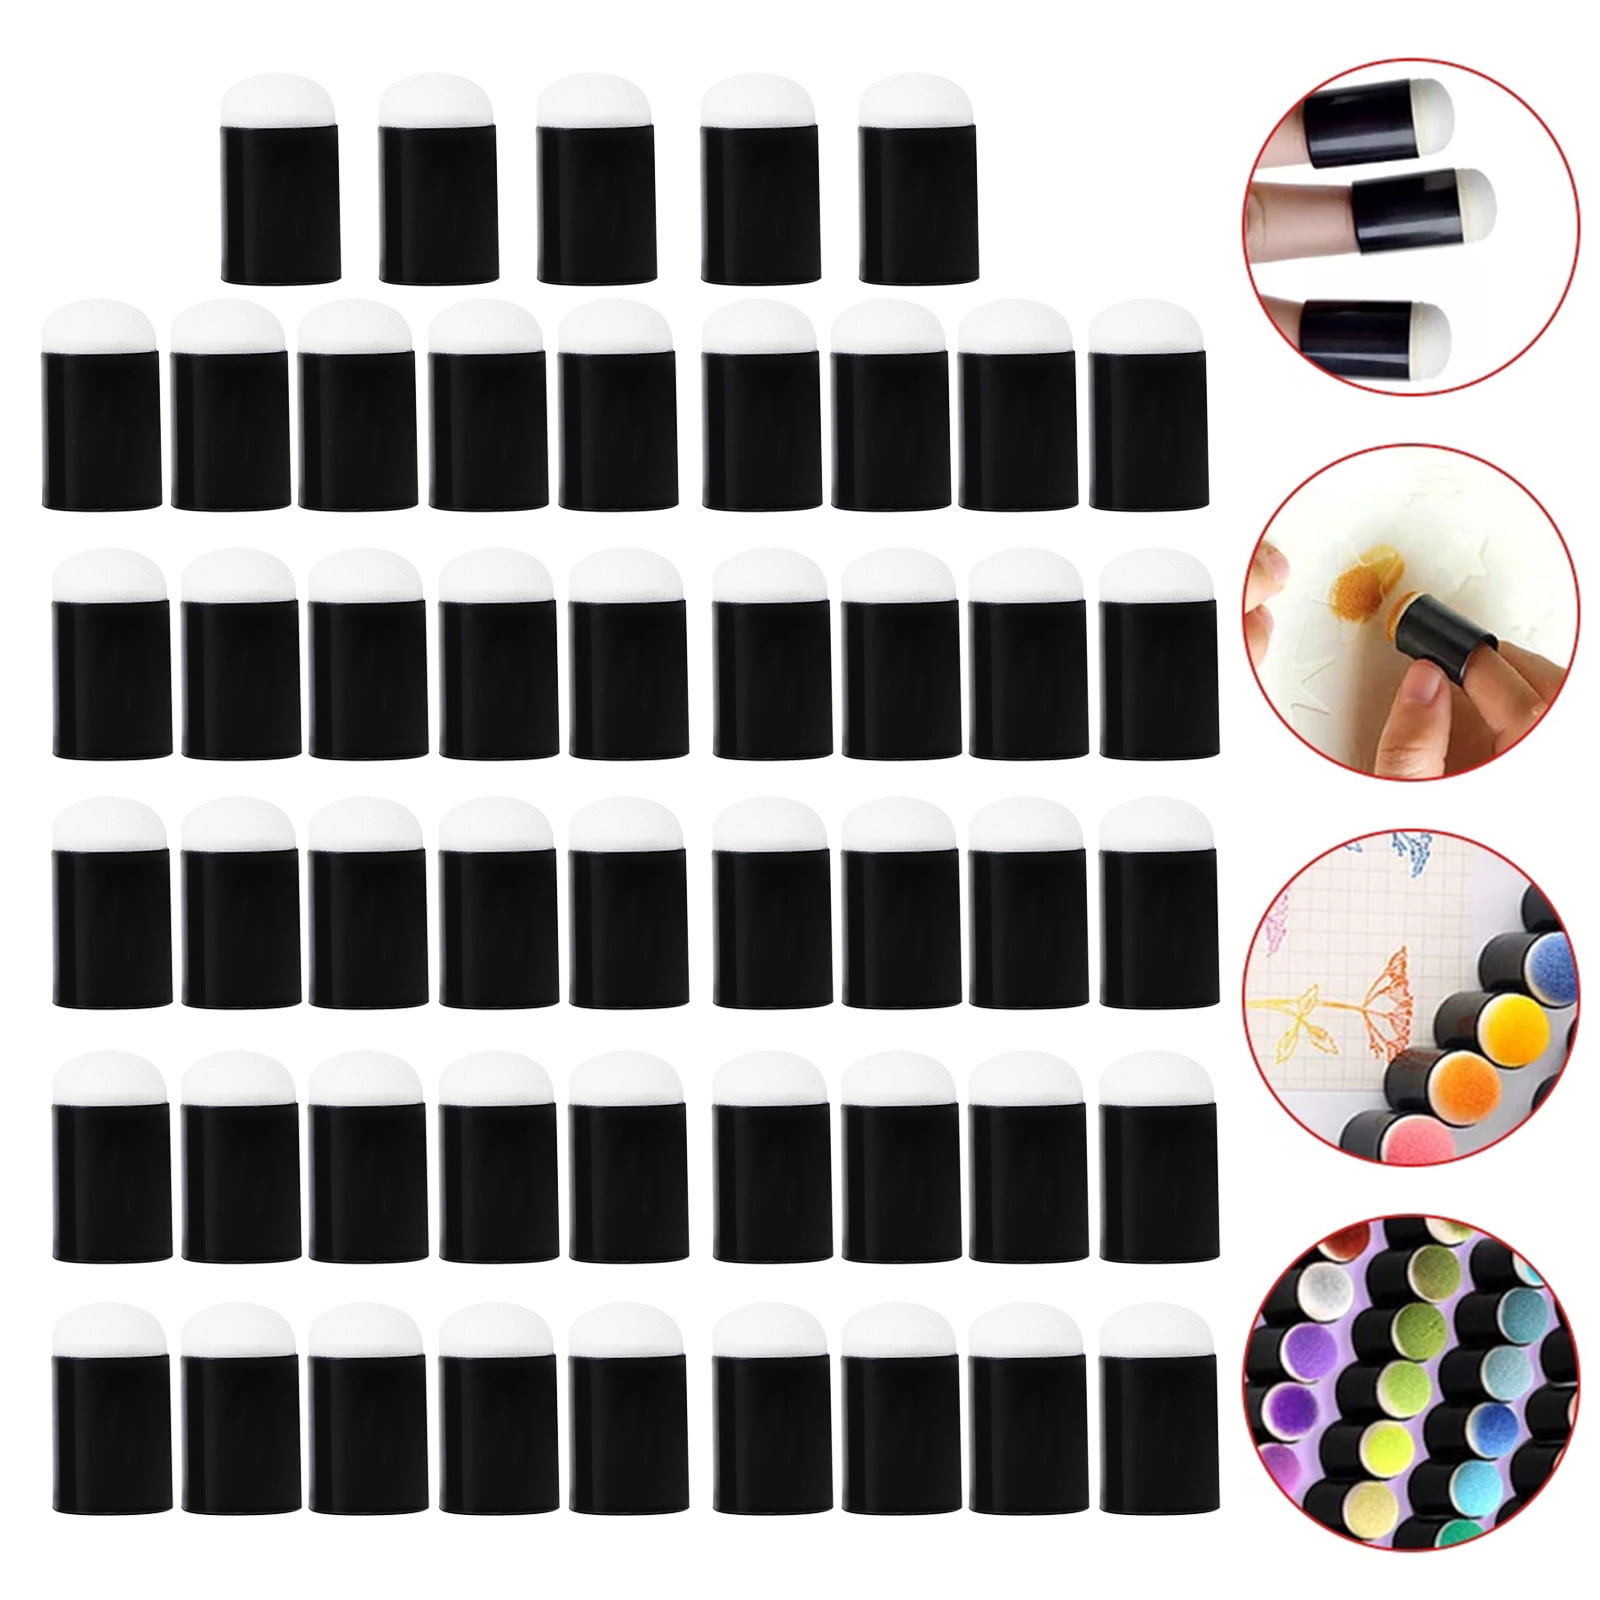 4Pcs Finger Daubers Foam for Applying Ink Chalk Staining Altering Craft New 